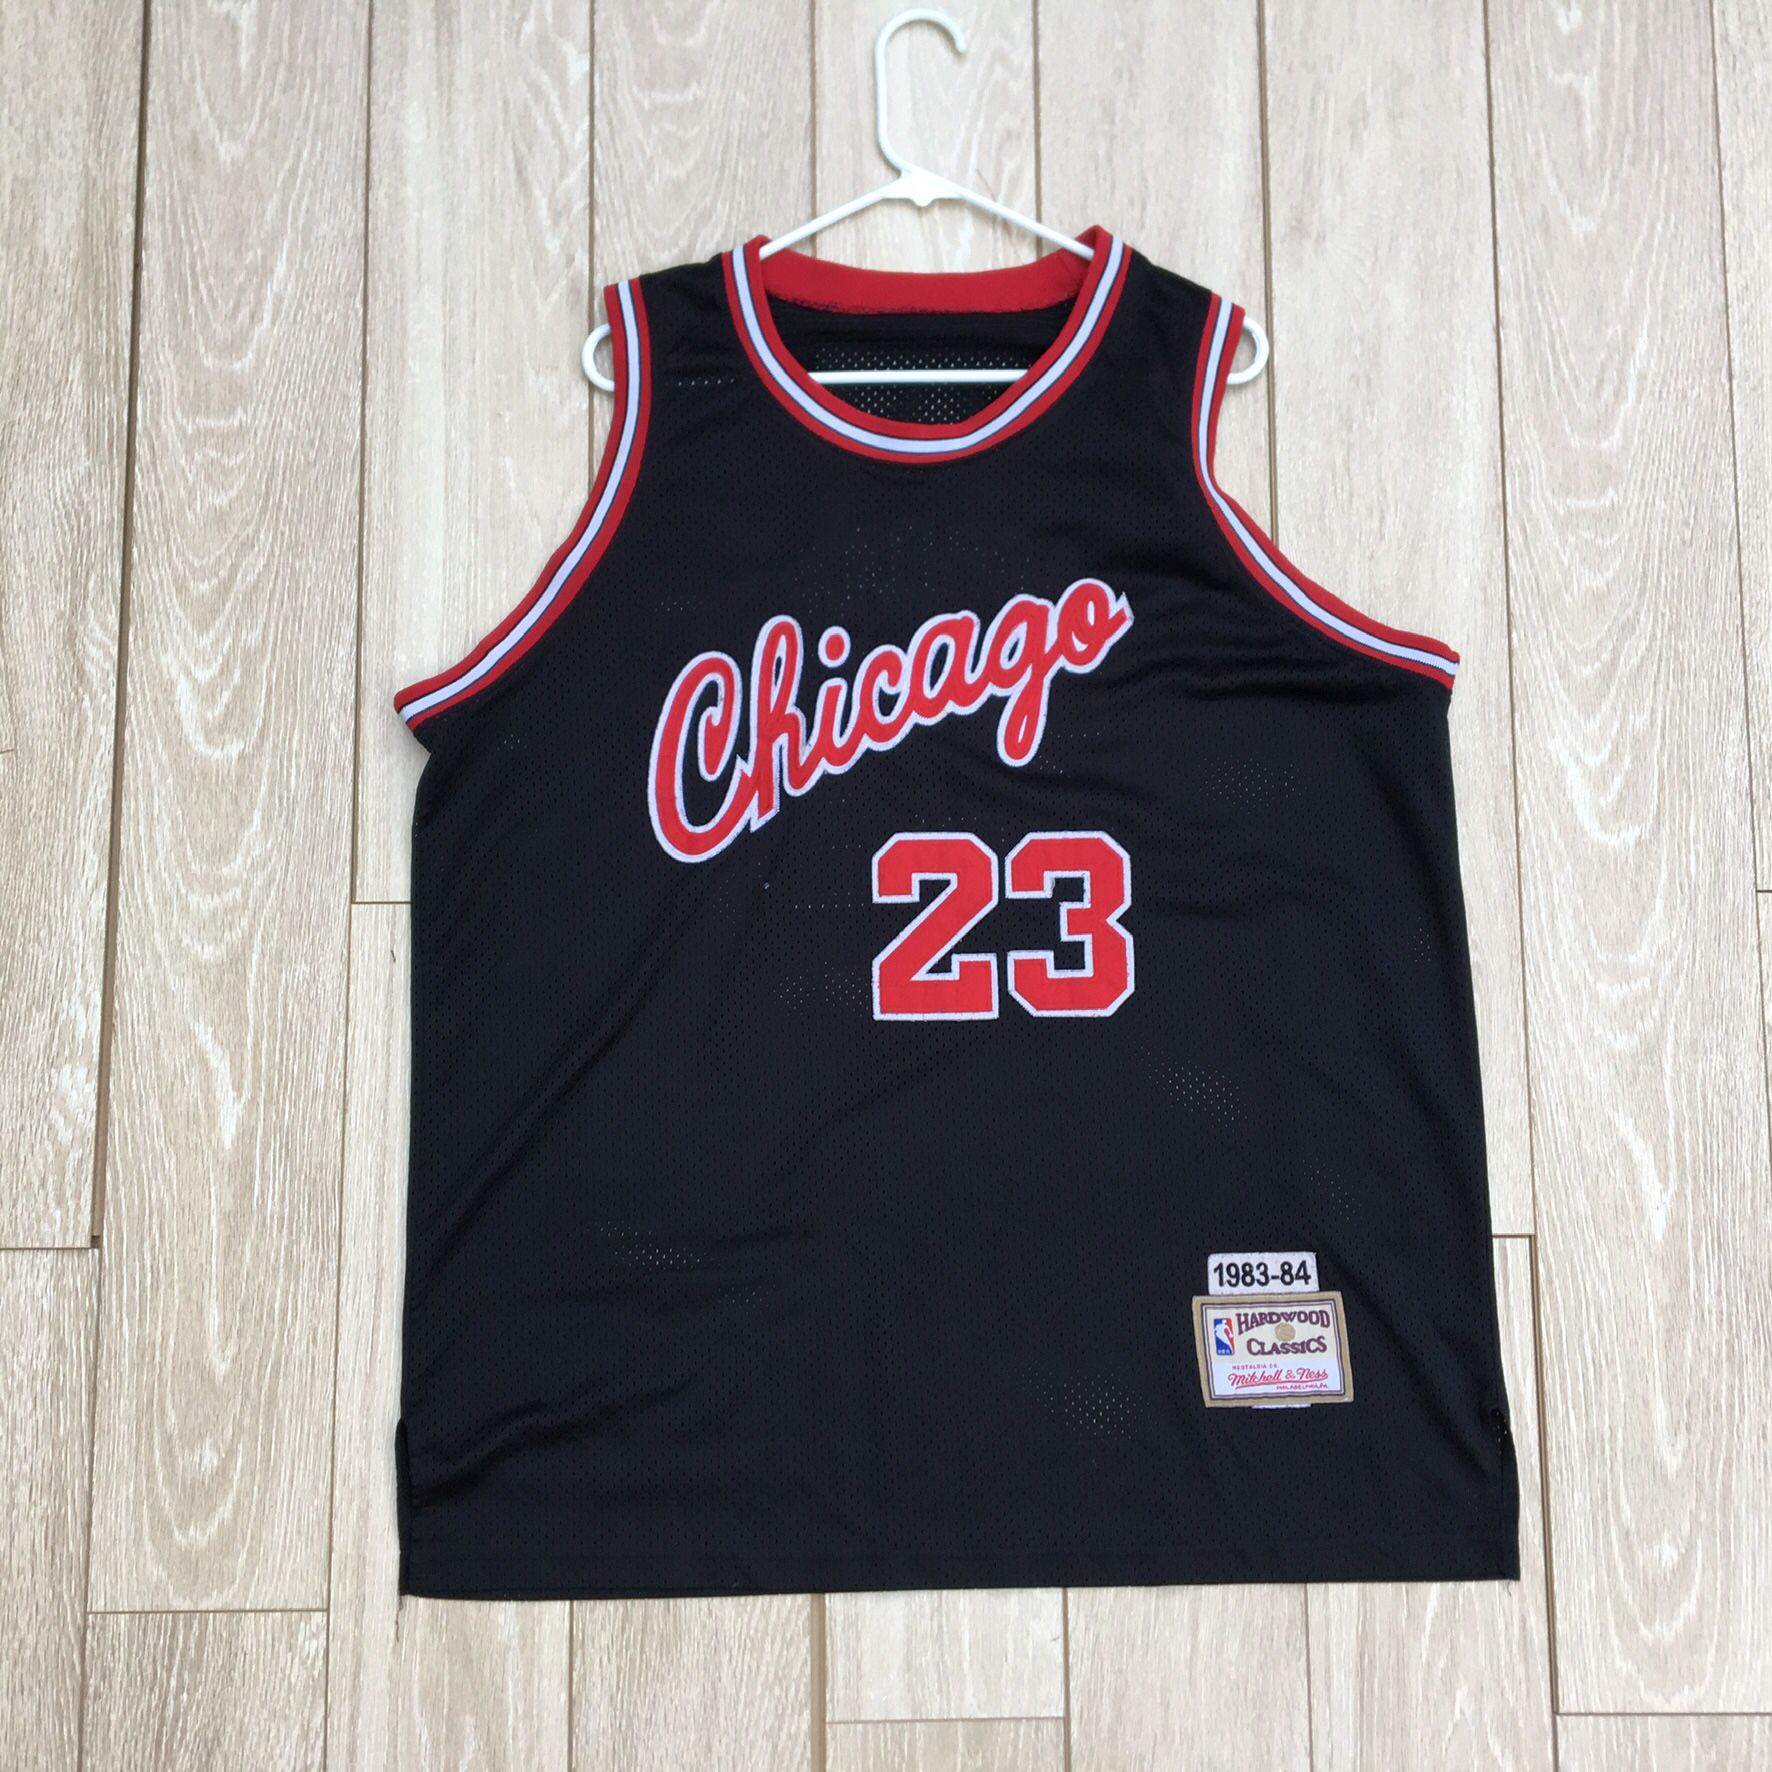 Chicago Bulls Jordan Jersey XL Or 2xl Firm On Price $45 for Sale in Orange,  CA - OfferUp